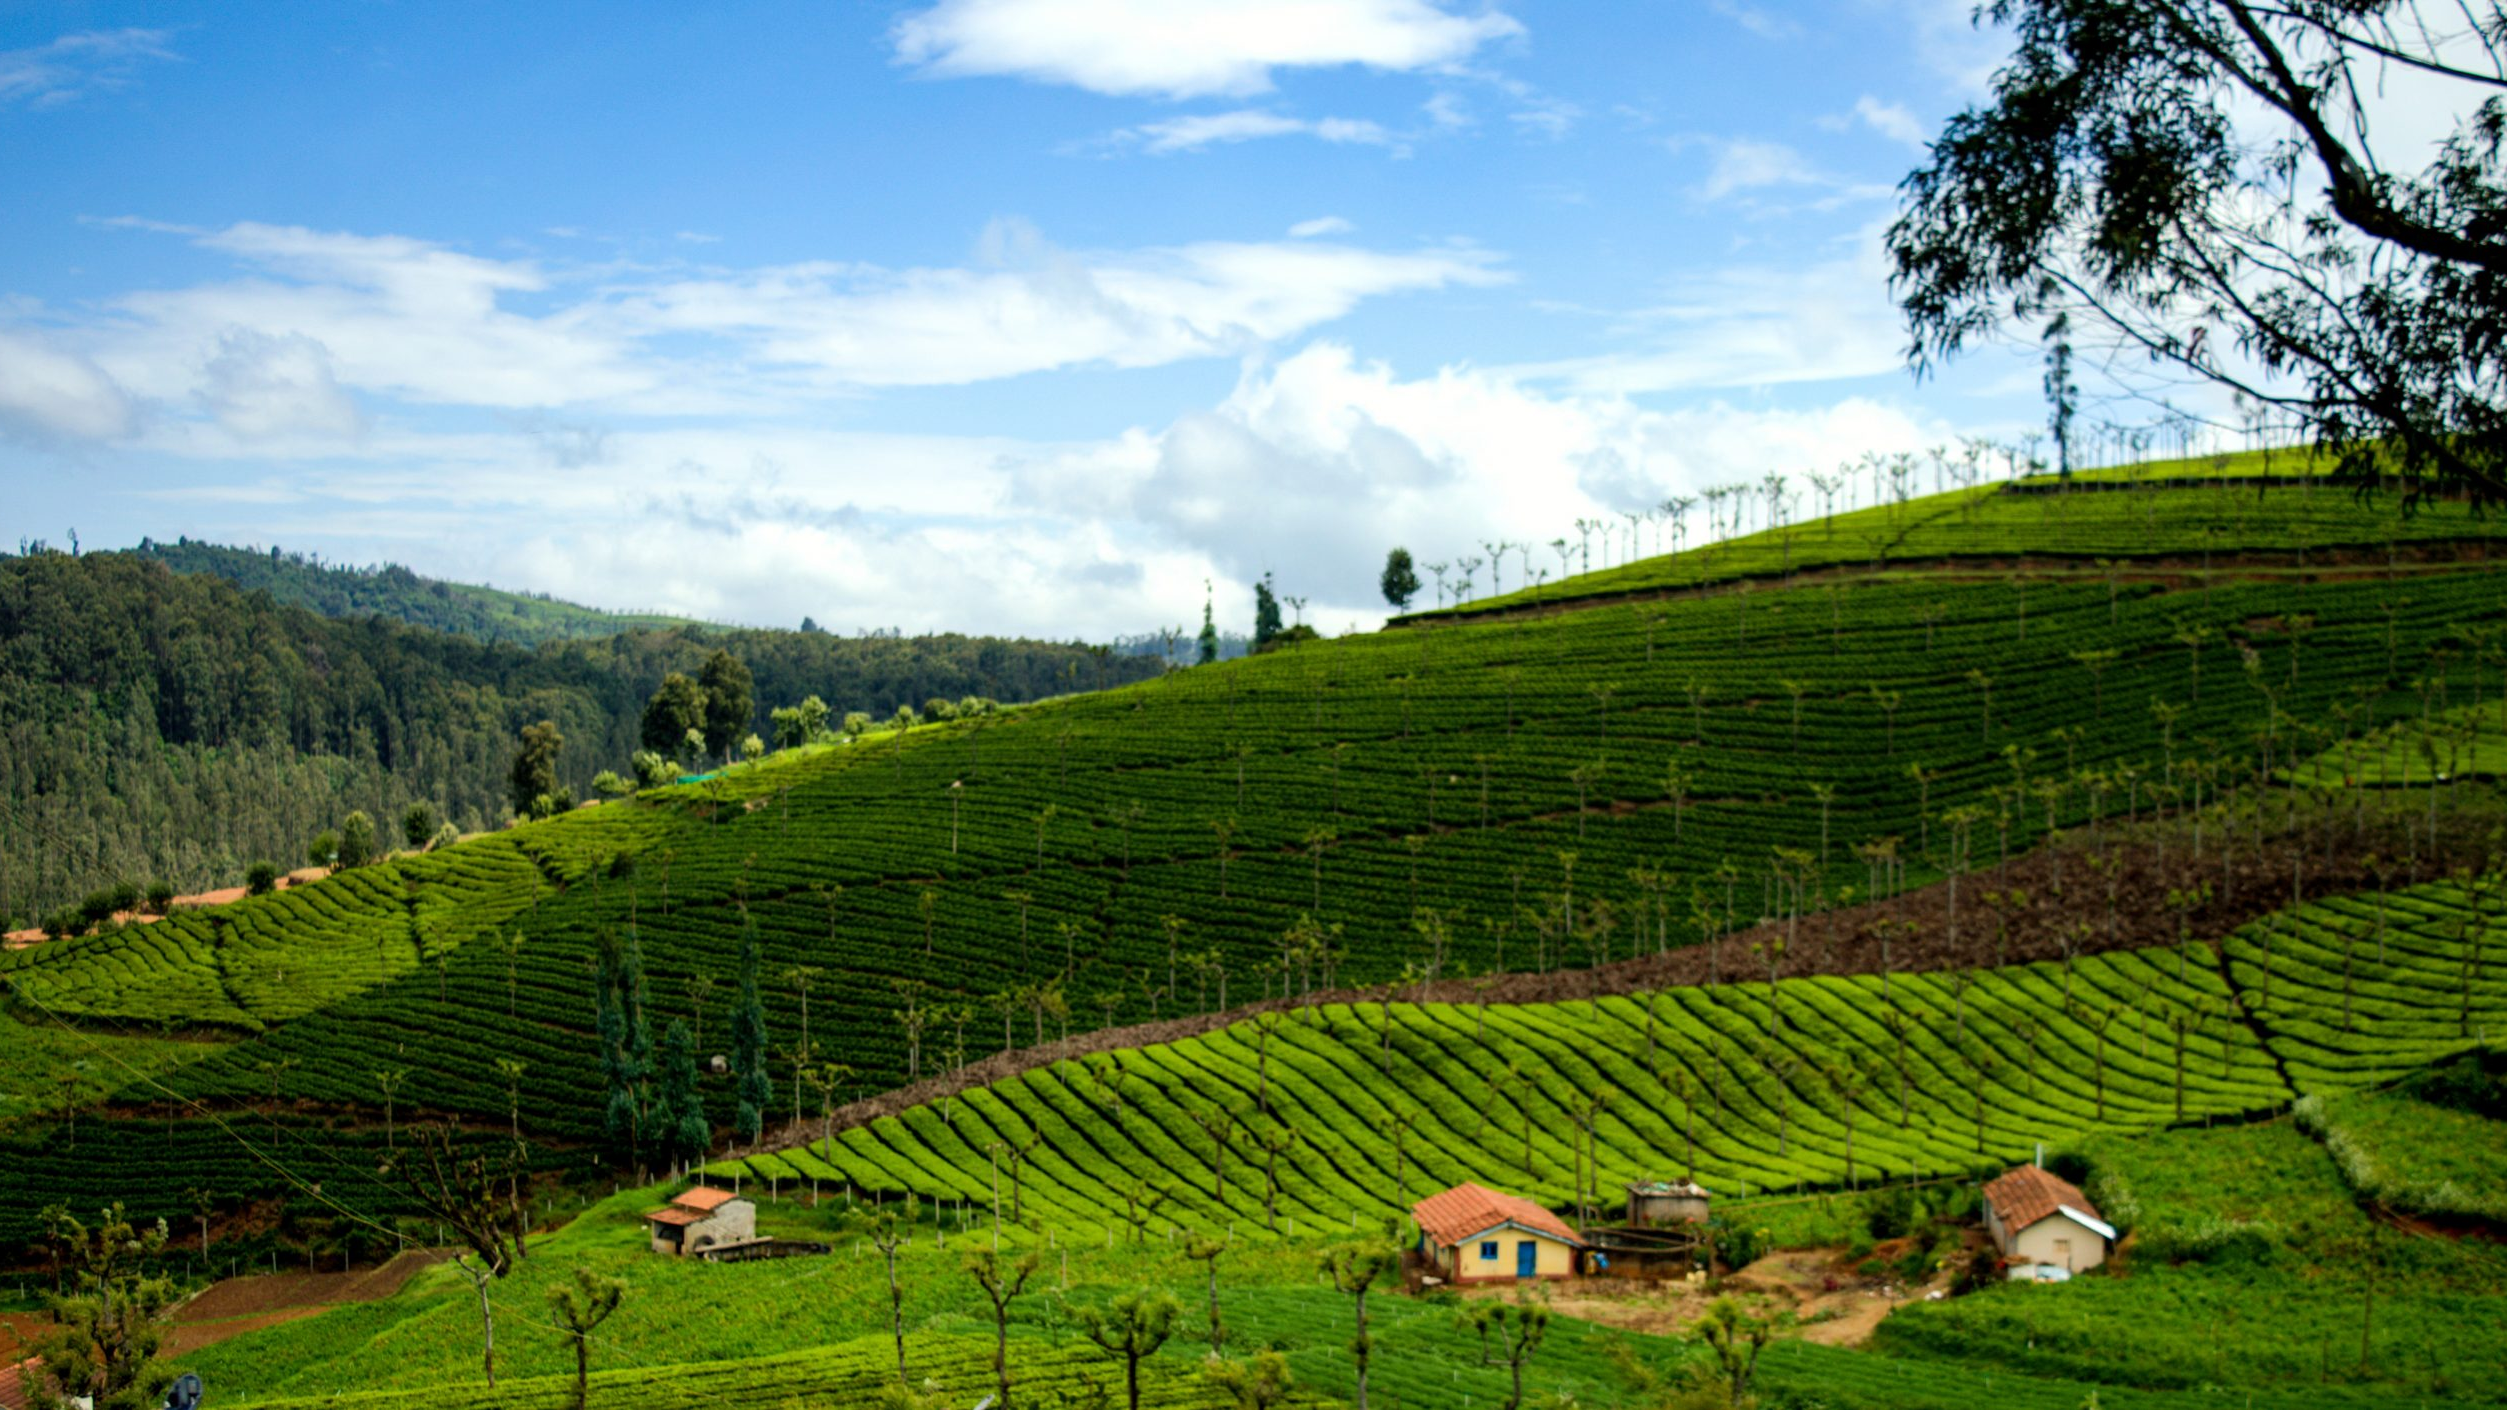 Coonoor is a perfect weekend getaway when visiting hill stations near Coimbatore